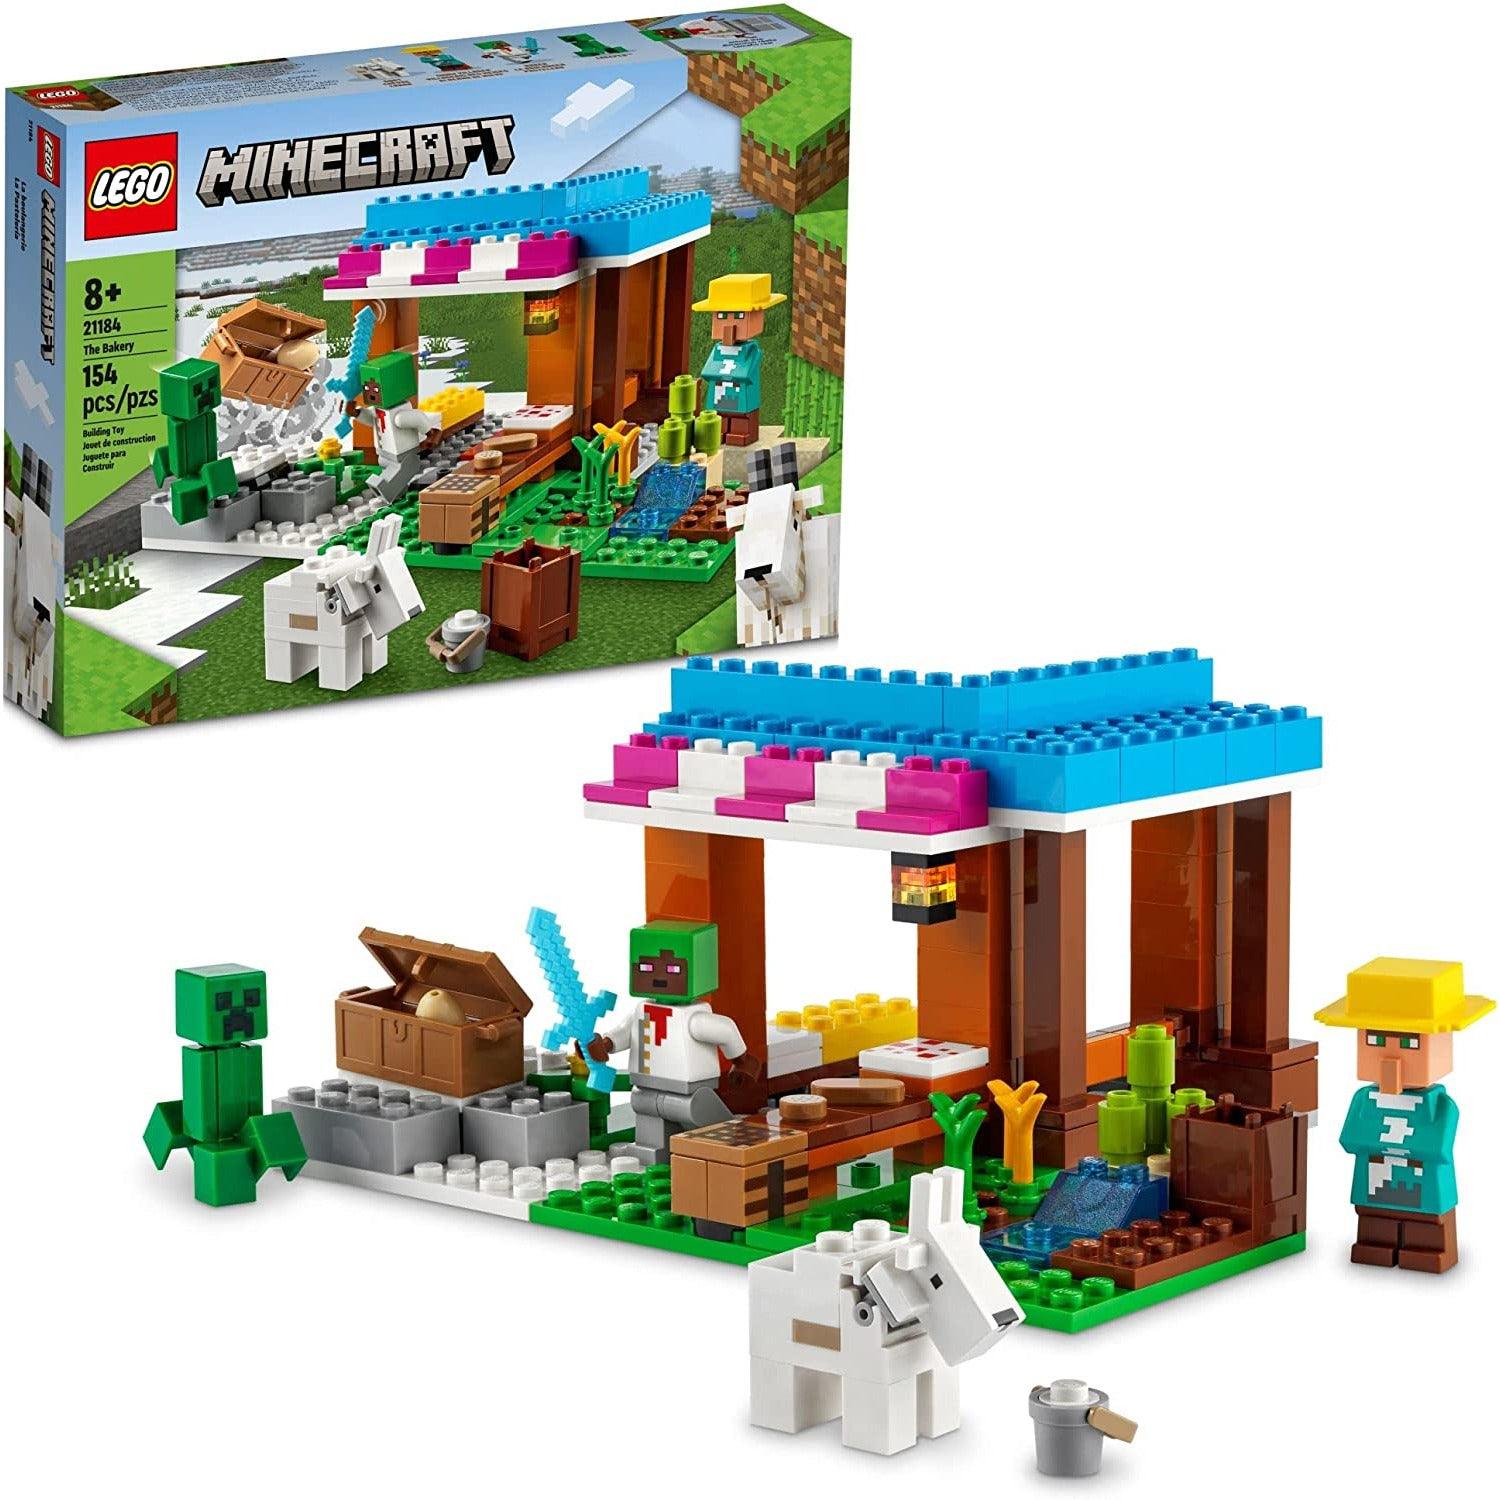 LEGO Minecraft The Bakery 21184 Building Toy Set for (157 Pieces) - BumbleToys - 18+, 8+ Years, Boys, LEGO, Minecraft, OXE, Pre-Order